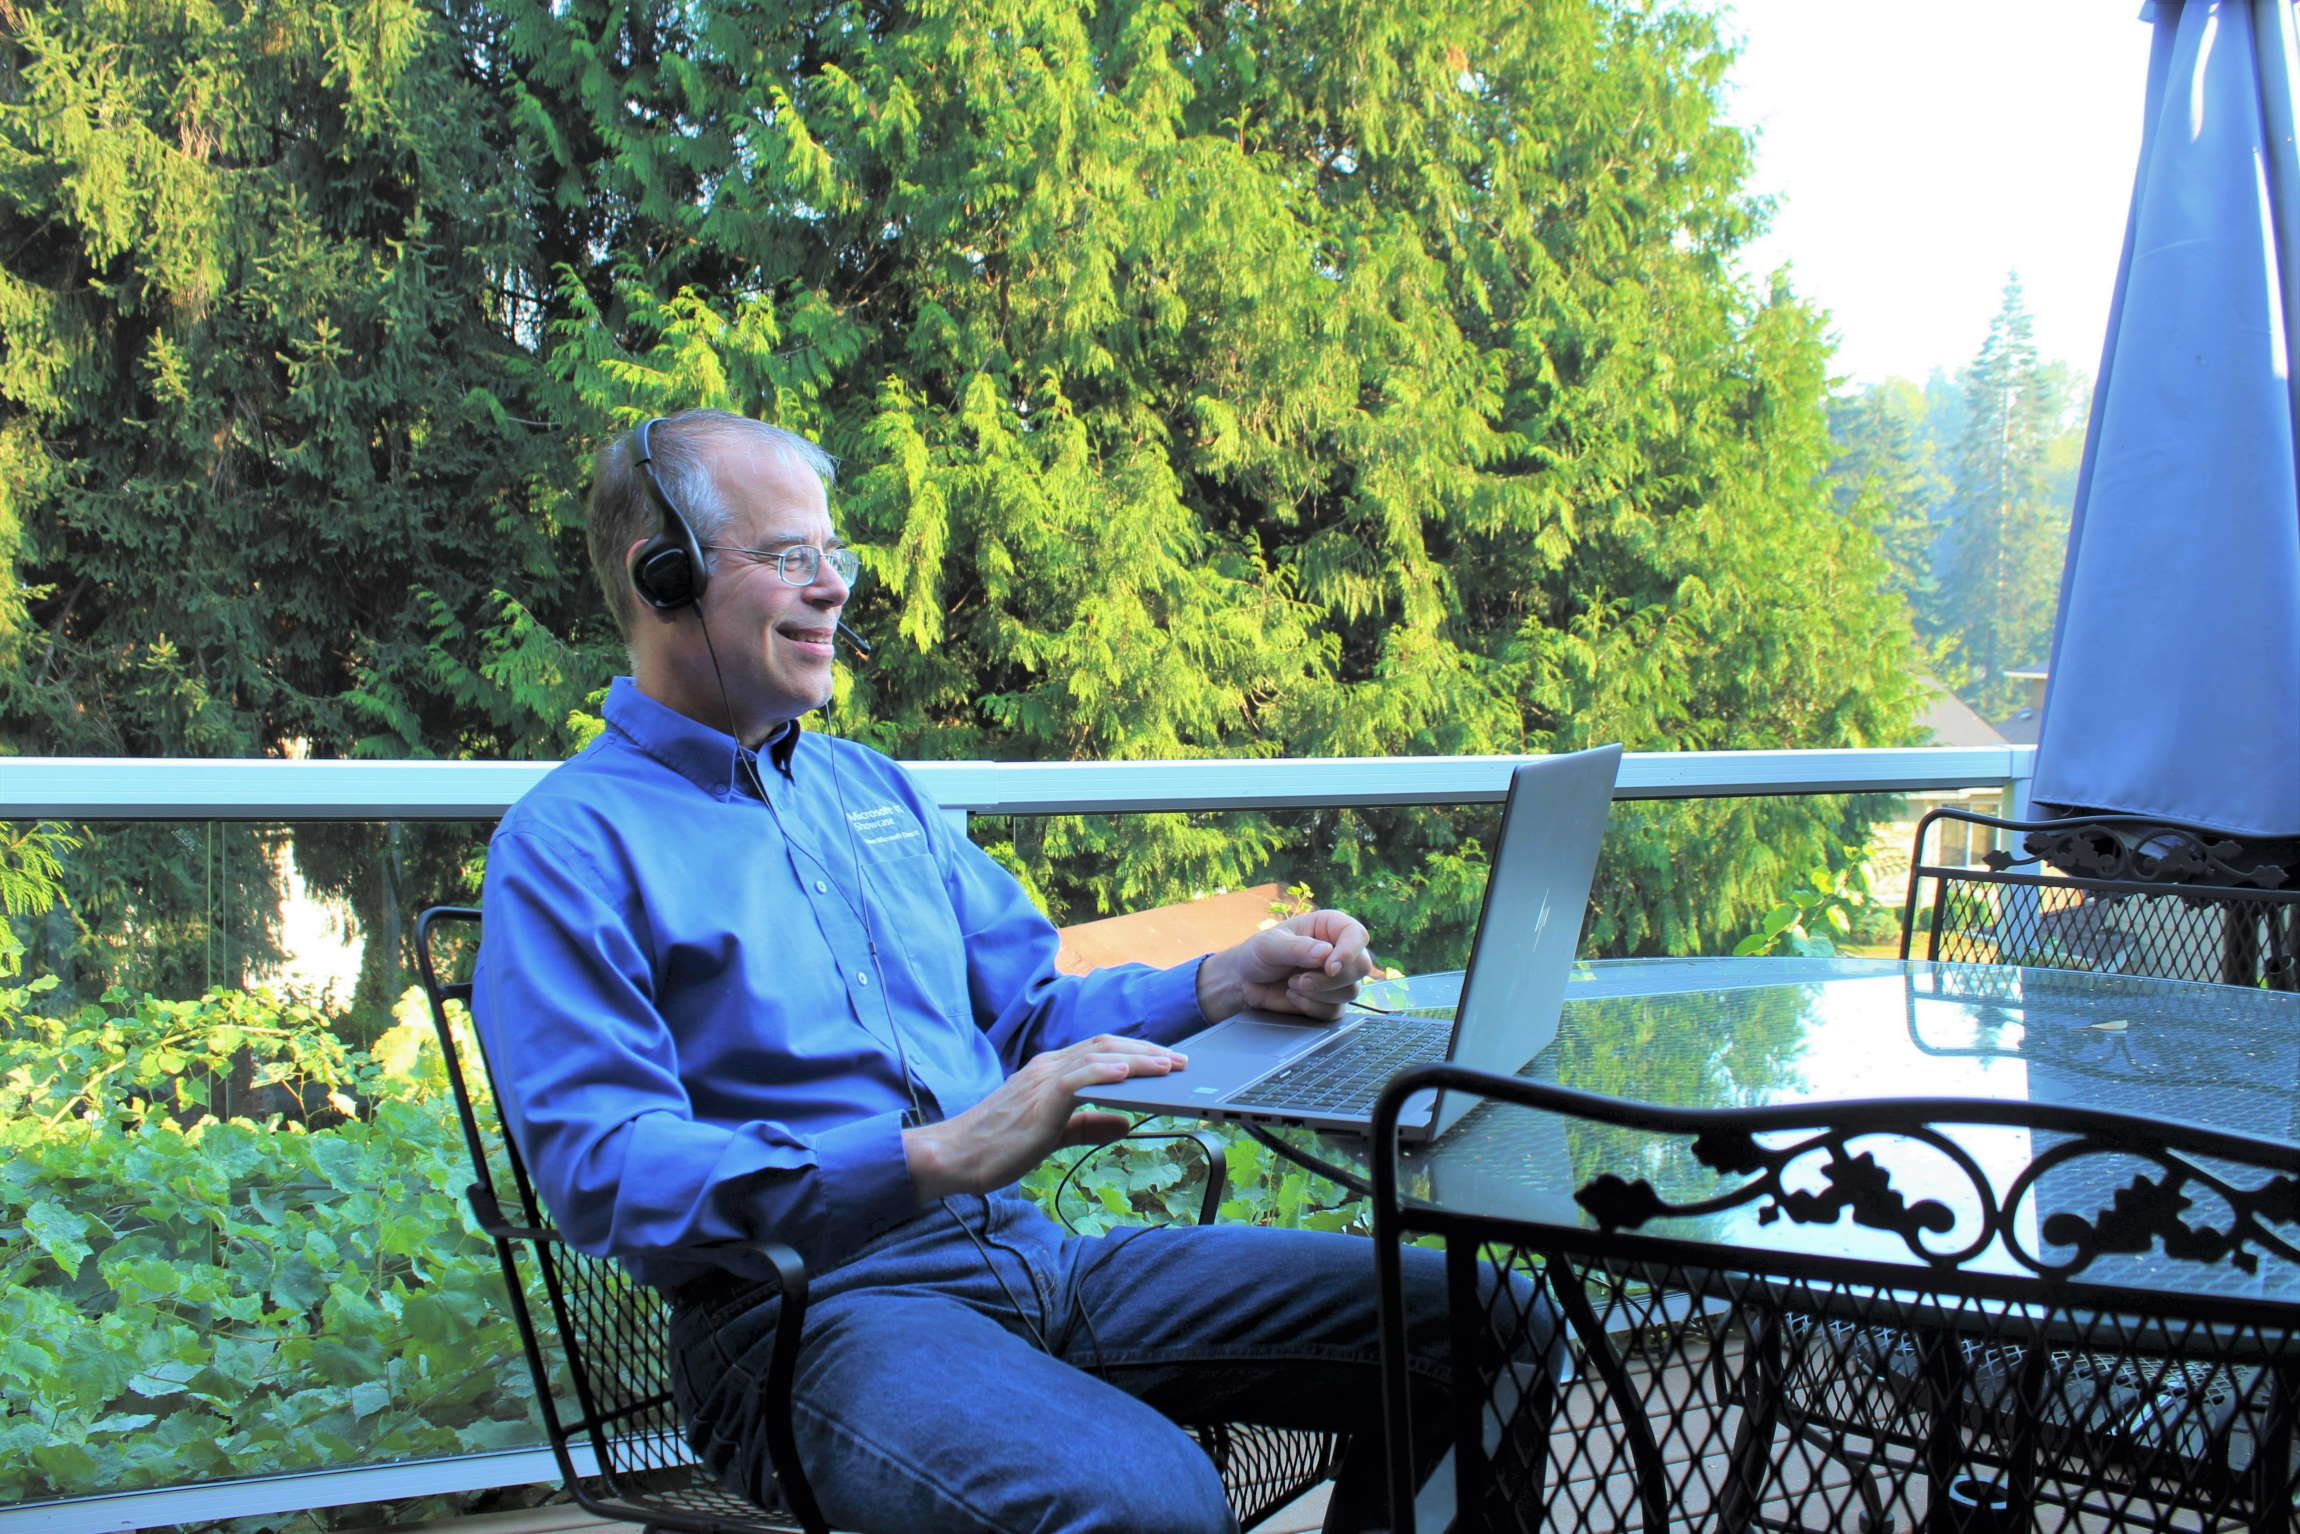 Dodd Willingham sits on his porch with his laptop, checking in with his search administration team.